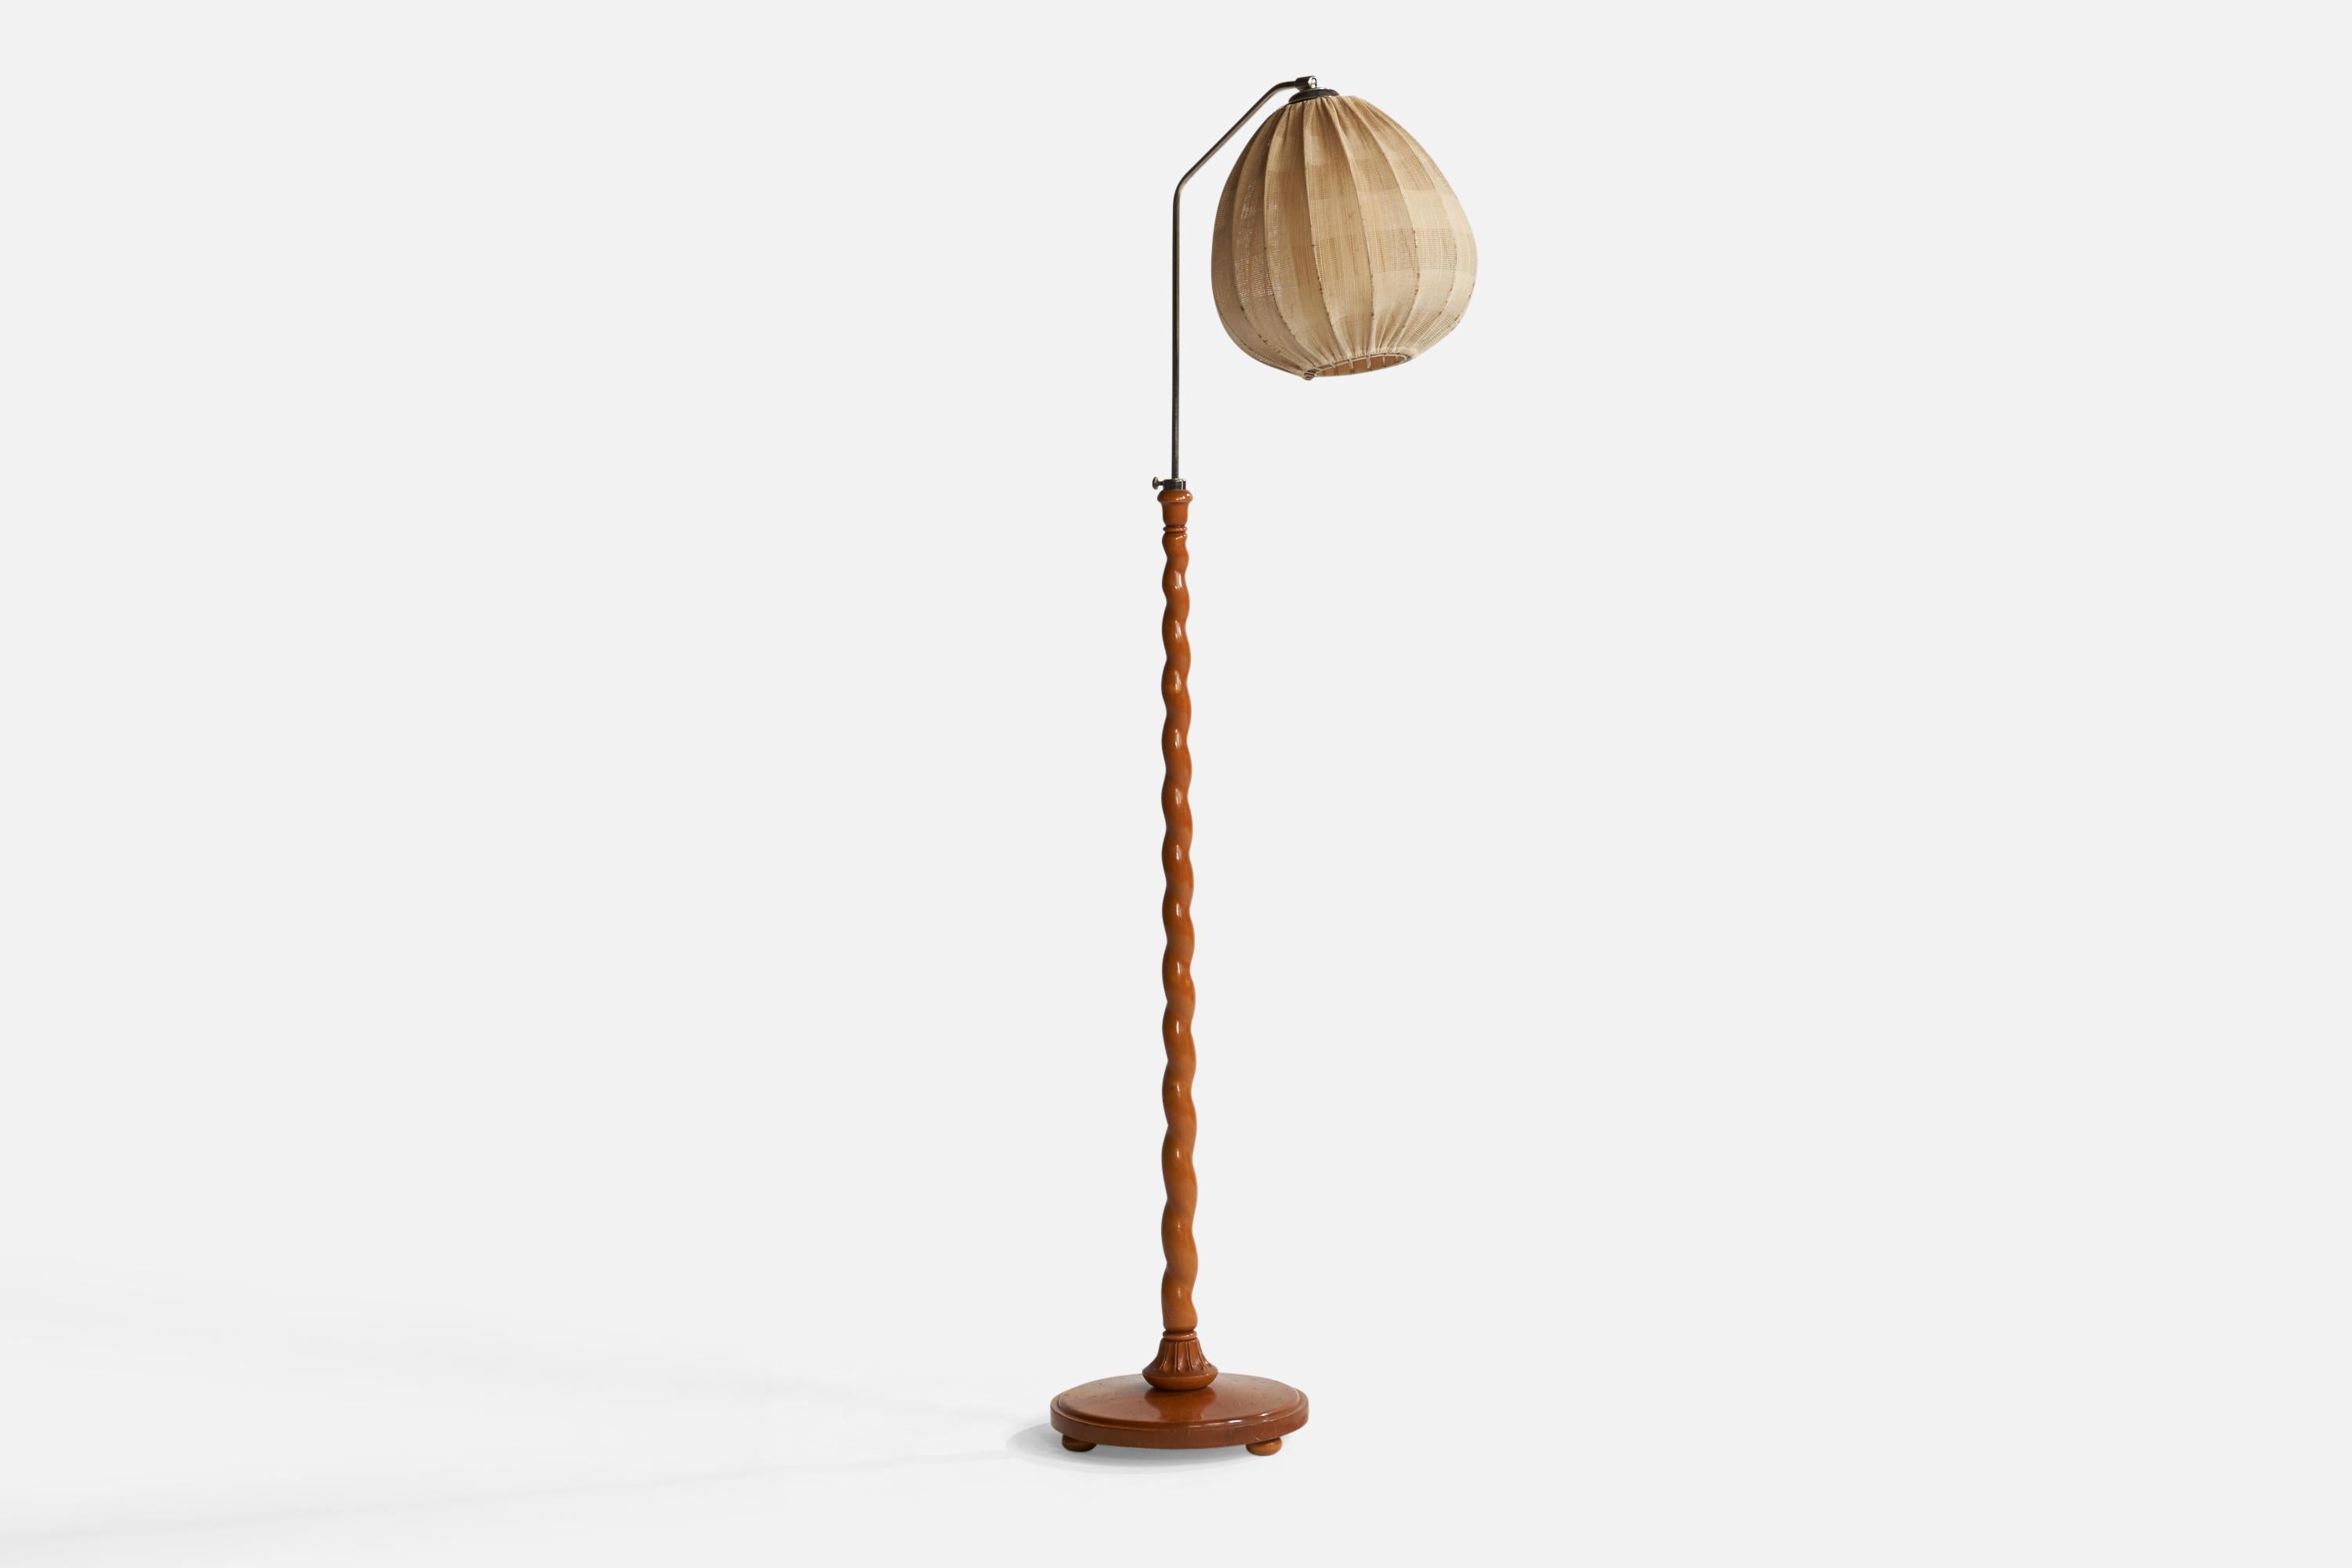 A wood, fabric and chrome-plated metal floor lamp designed and produced in Sweden, c. 1930s.

Overall Dimensions (inches): 59” H x 12.1” Diameter. Stated dimensions include shade.
Height and angle of shade are adjustable.
Bulb Specifications: E-26